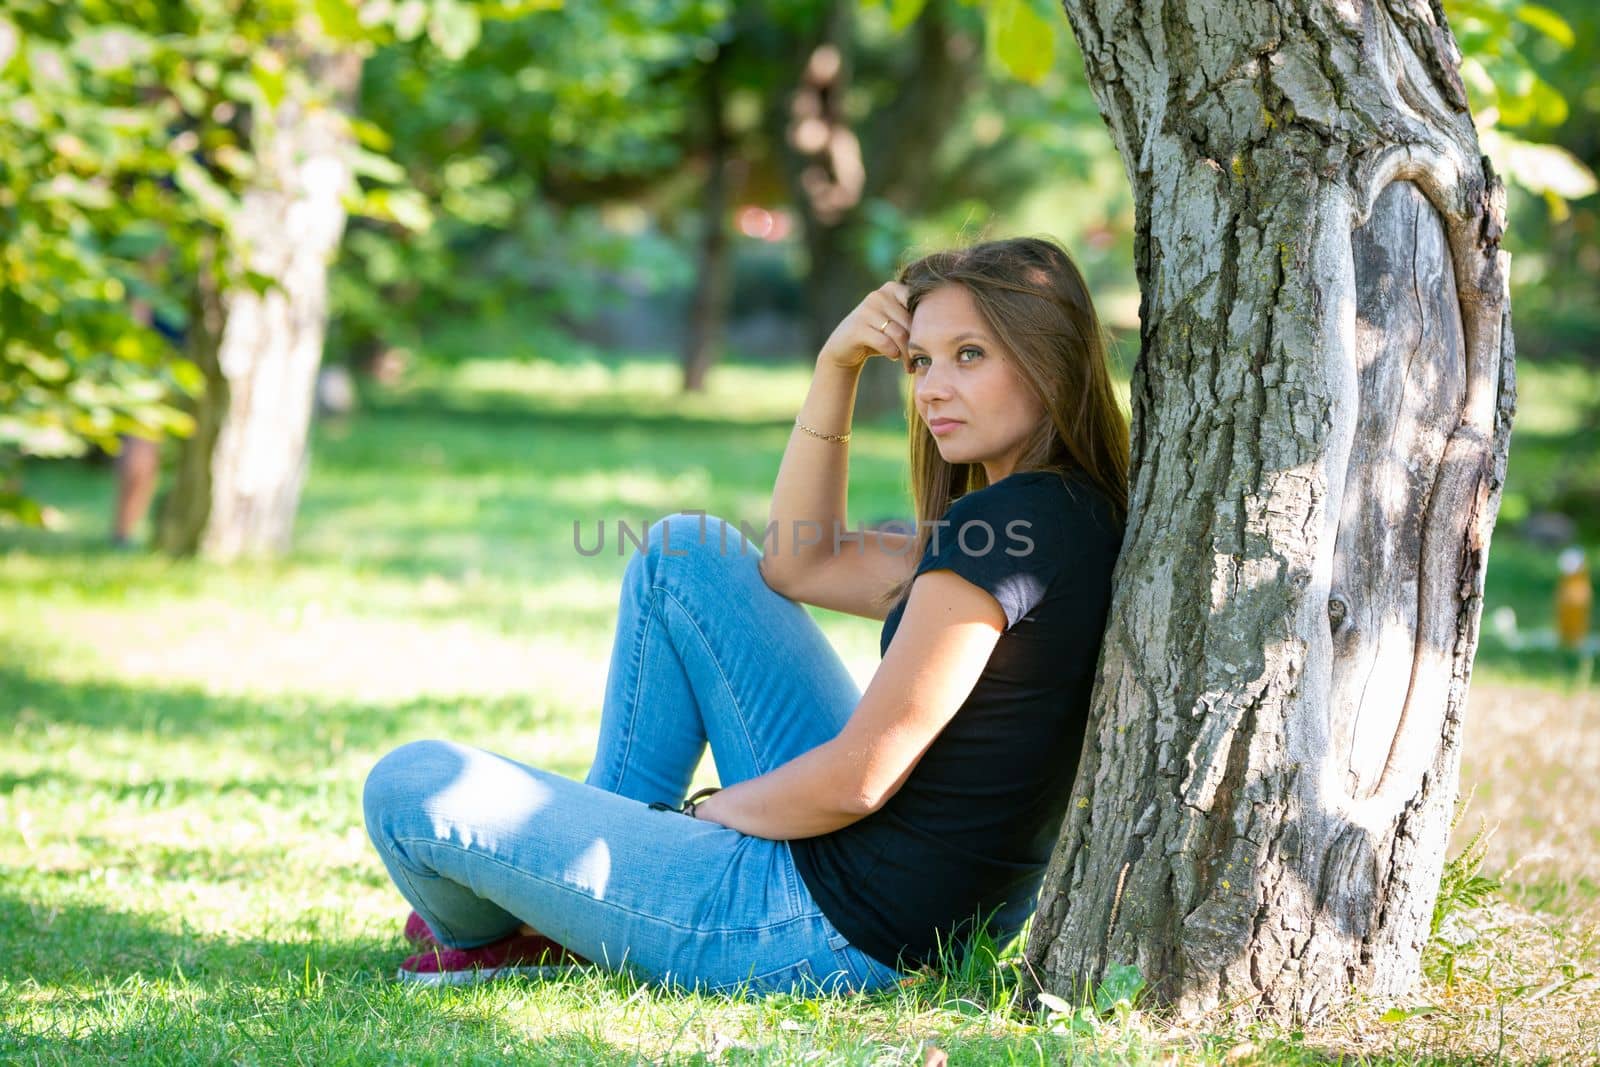 A girl sits under a tree in a sunny park and looks into the distance in thought a